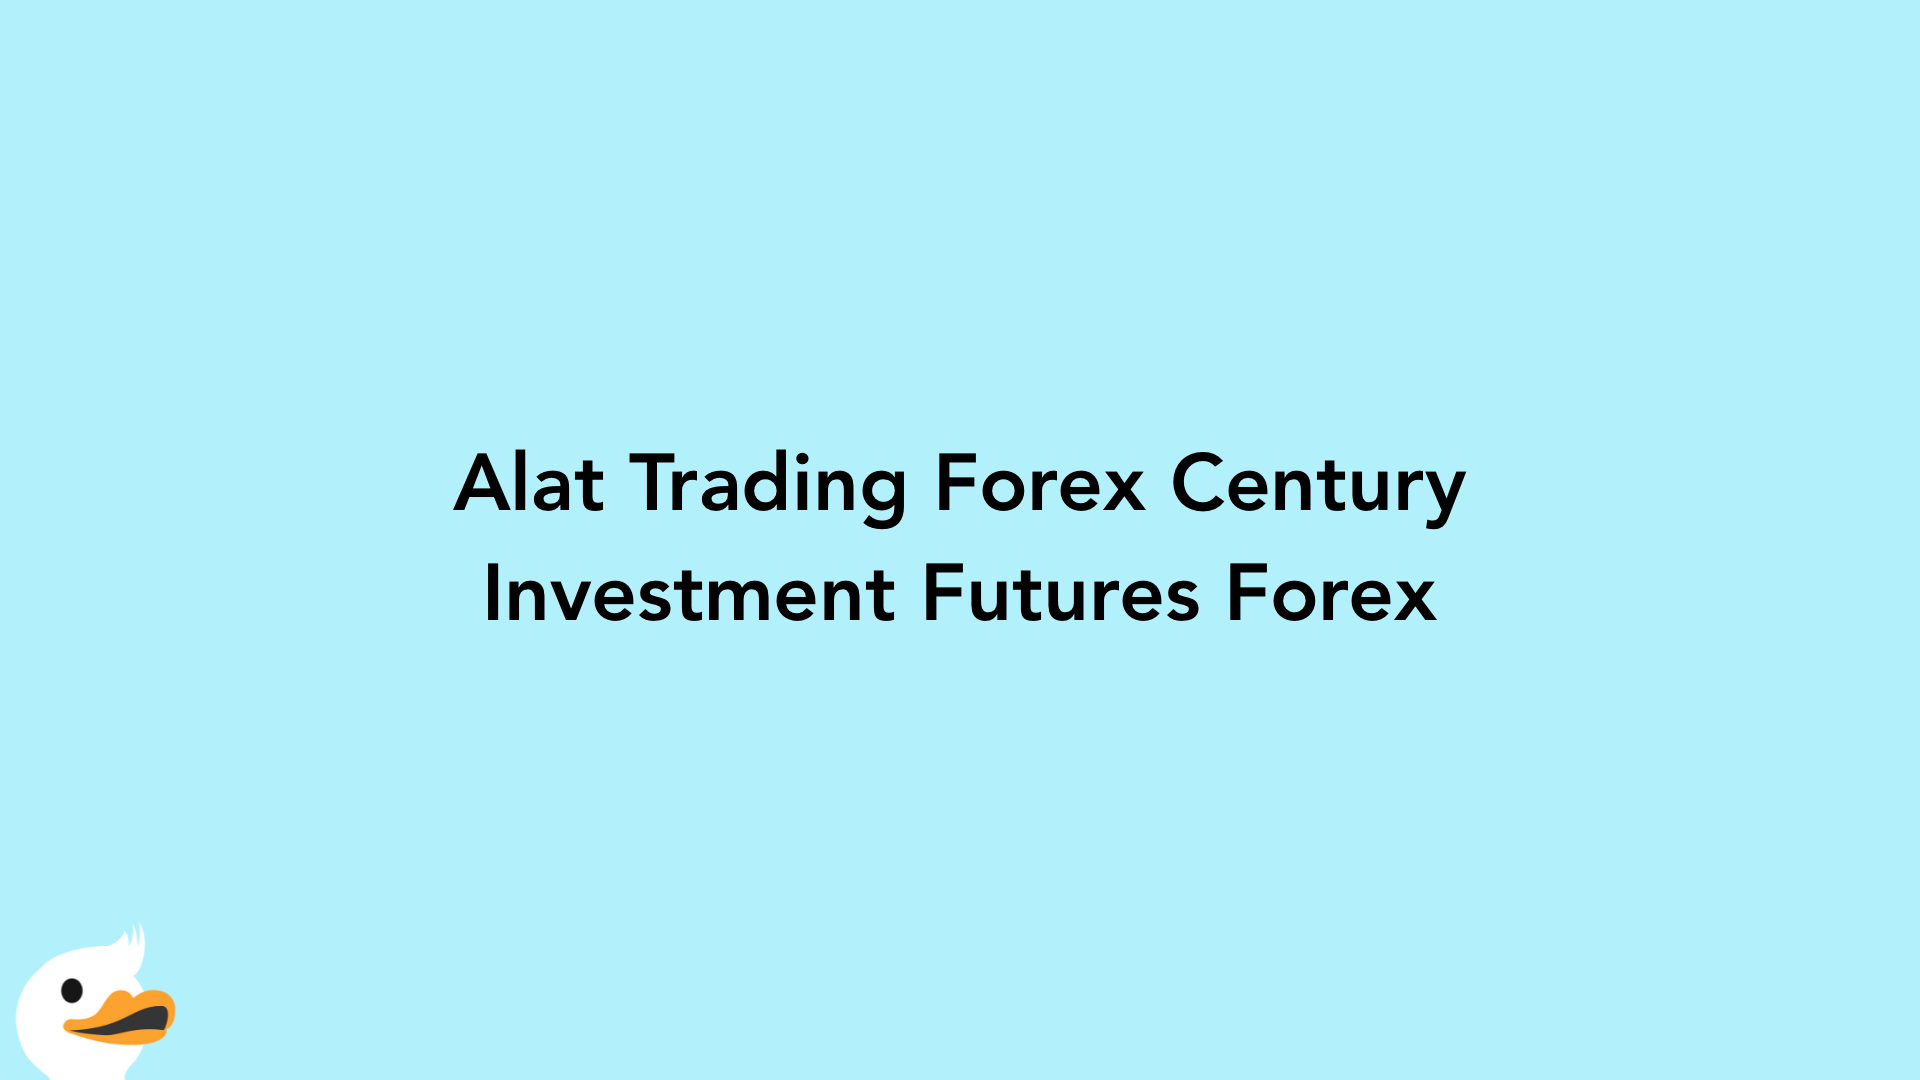 Alat Trading Forex Century Investment Futures Forex